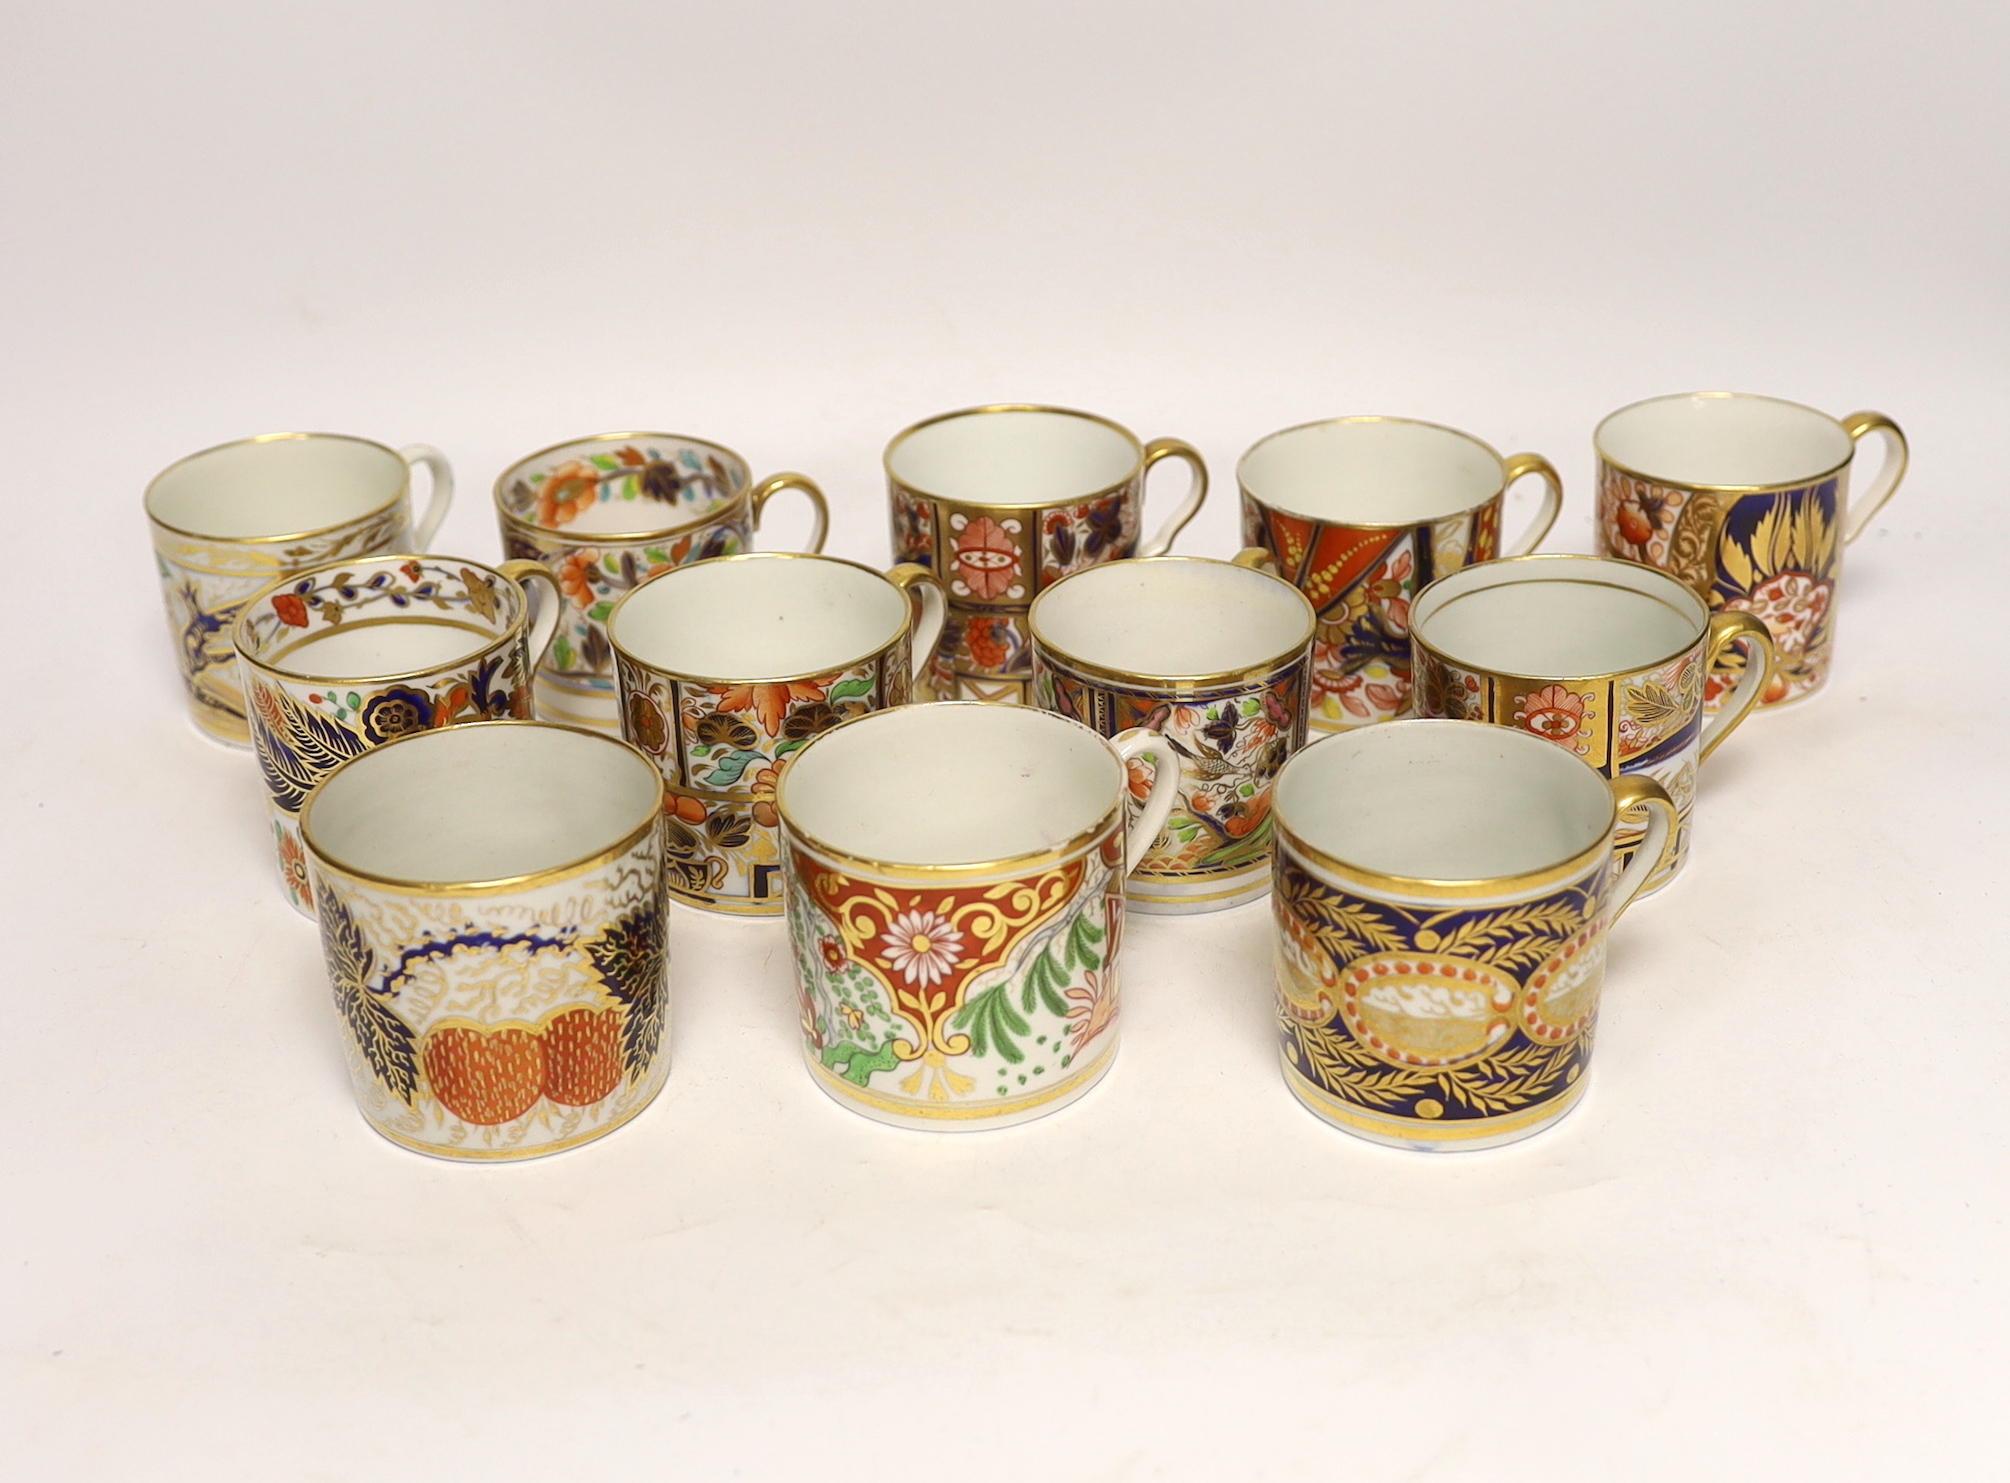 Twelve 1800-1820 English Imari style patterned coffee cans